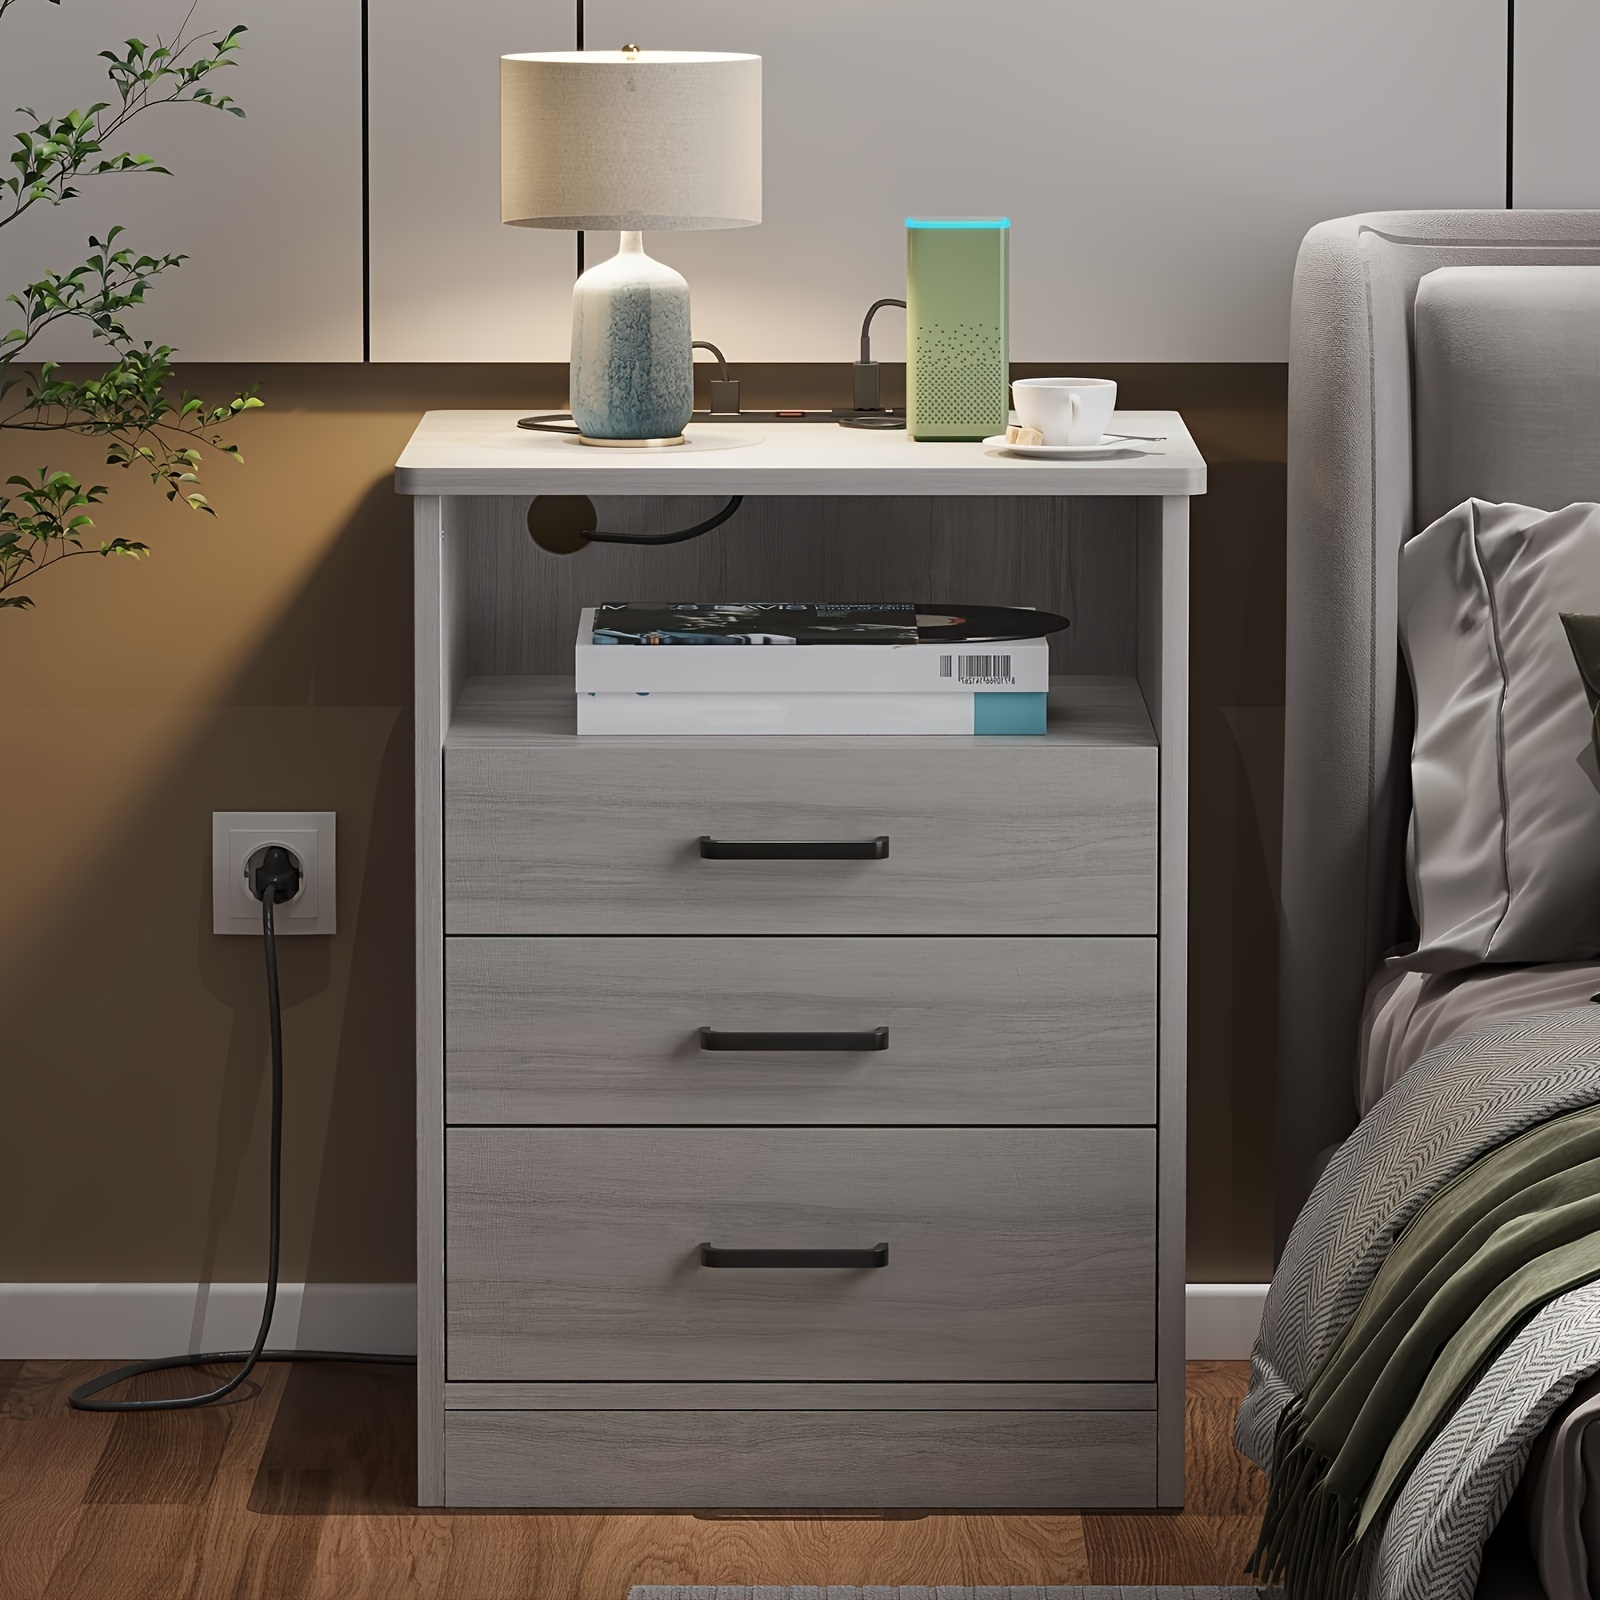 

1pcs Nightstand For Bedroom, Nightstand With Drawers And Charging Station, Bedside Table With Storage, Grey